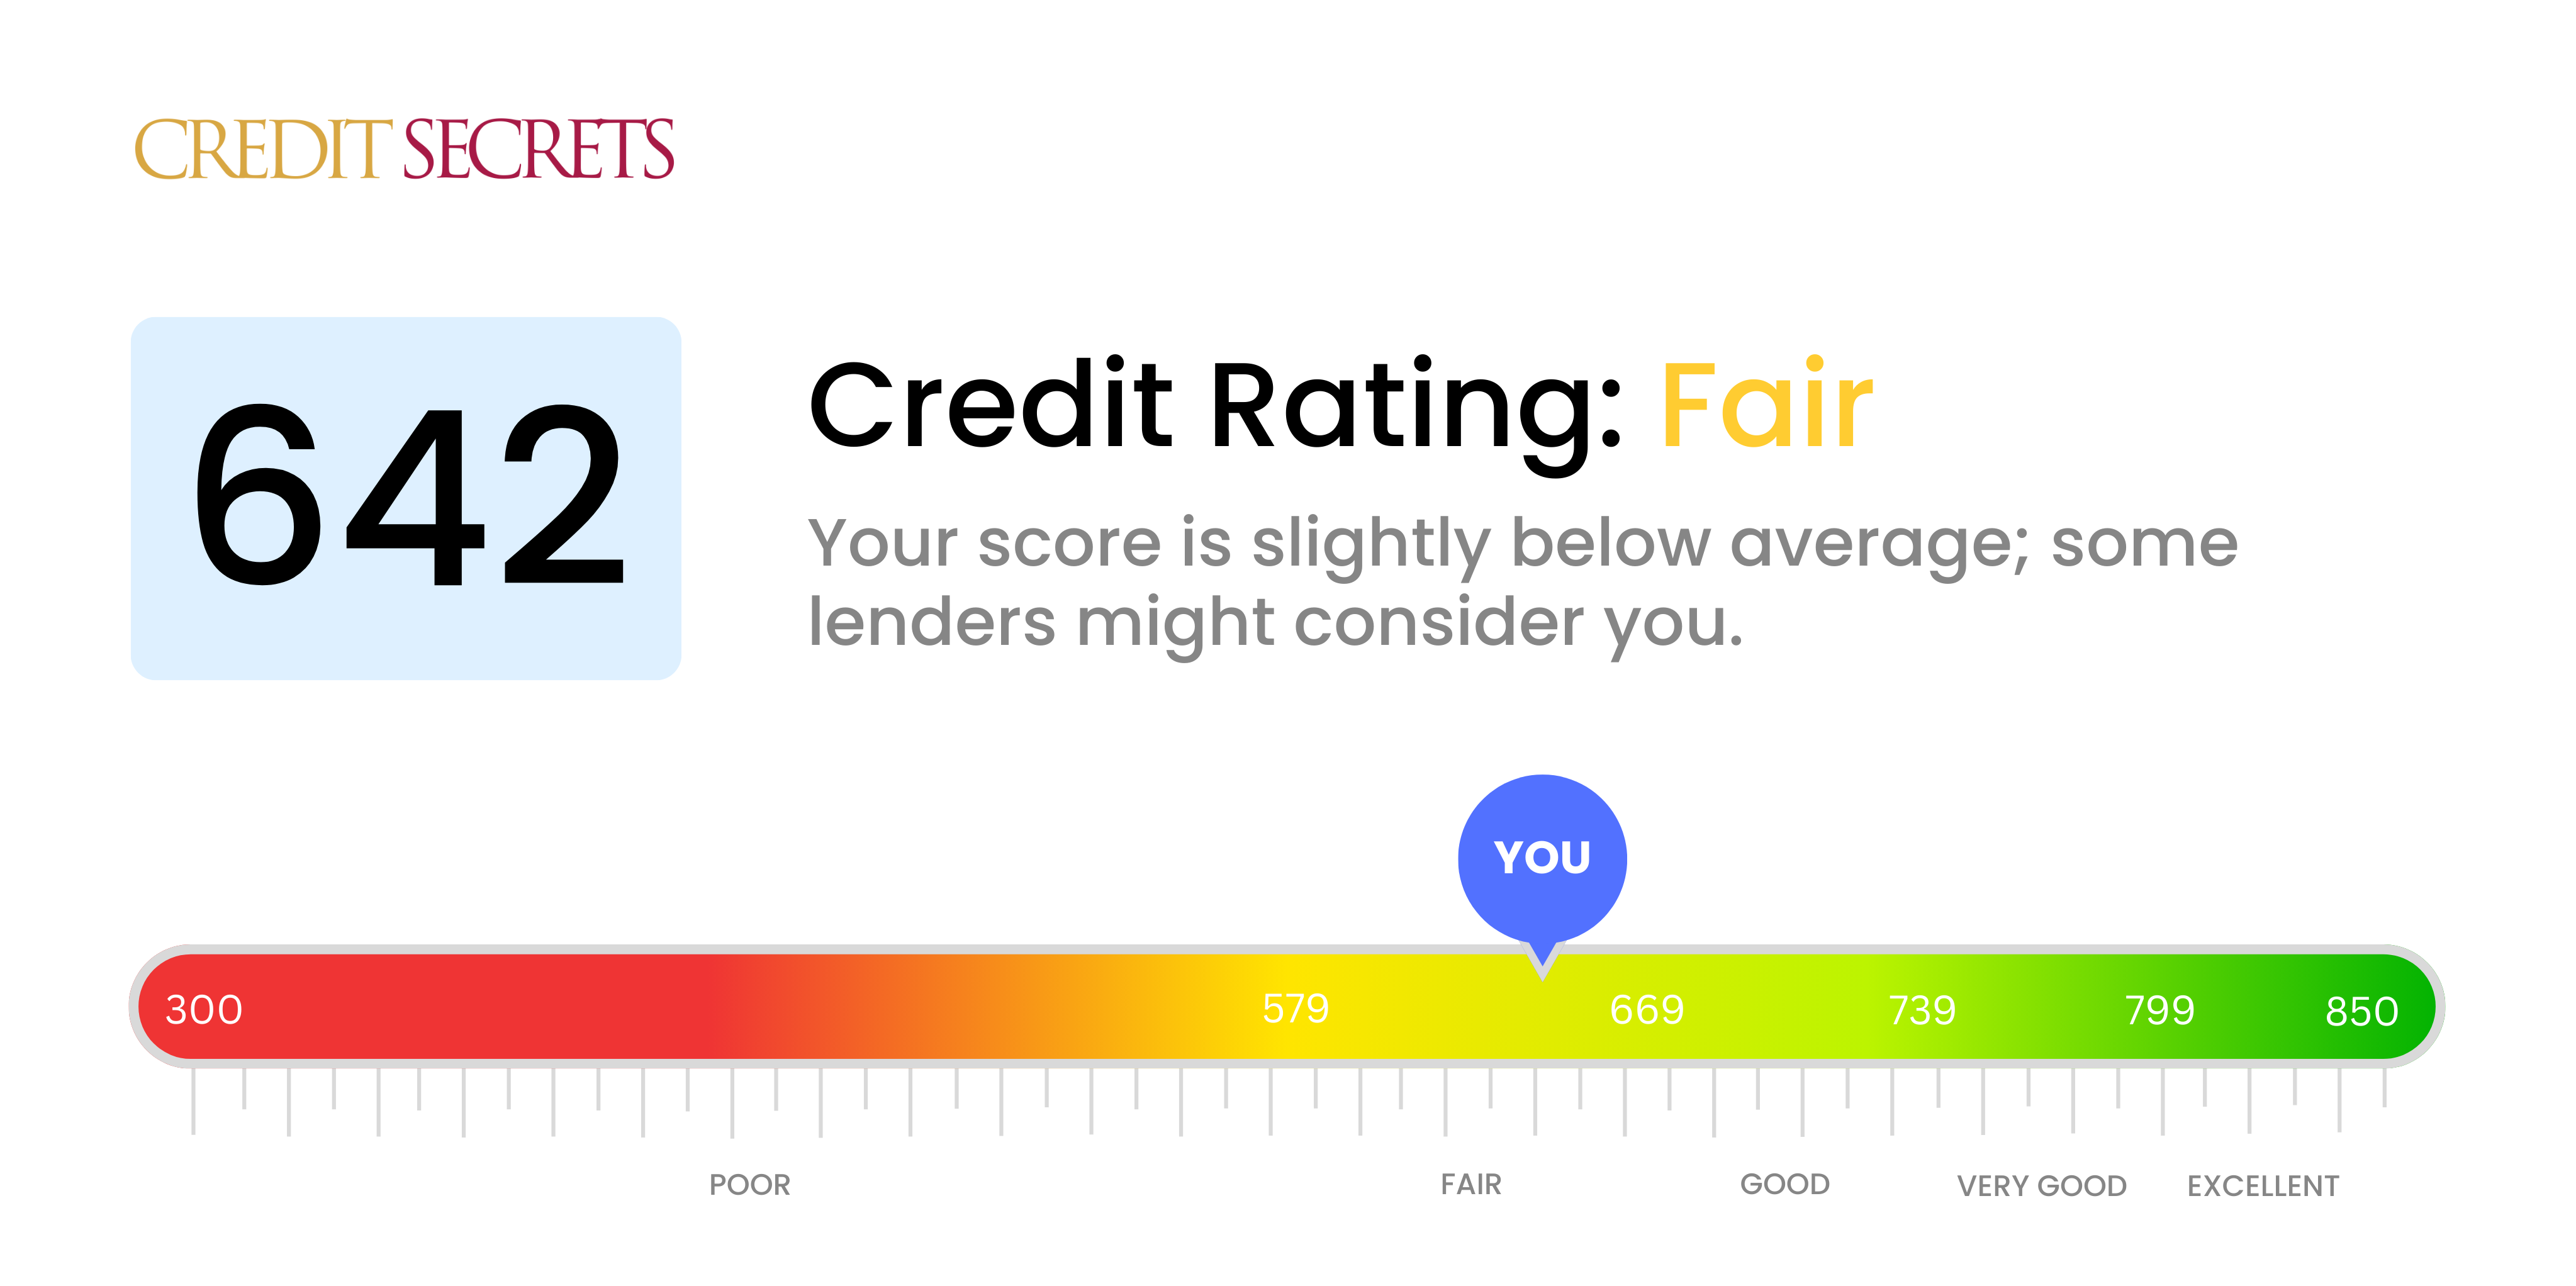 Is 642 a good credit score?